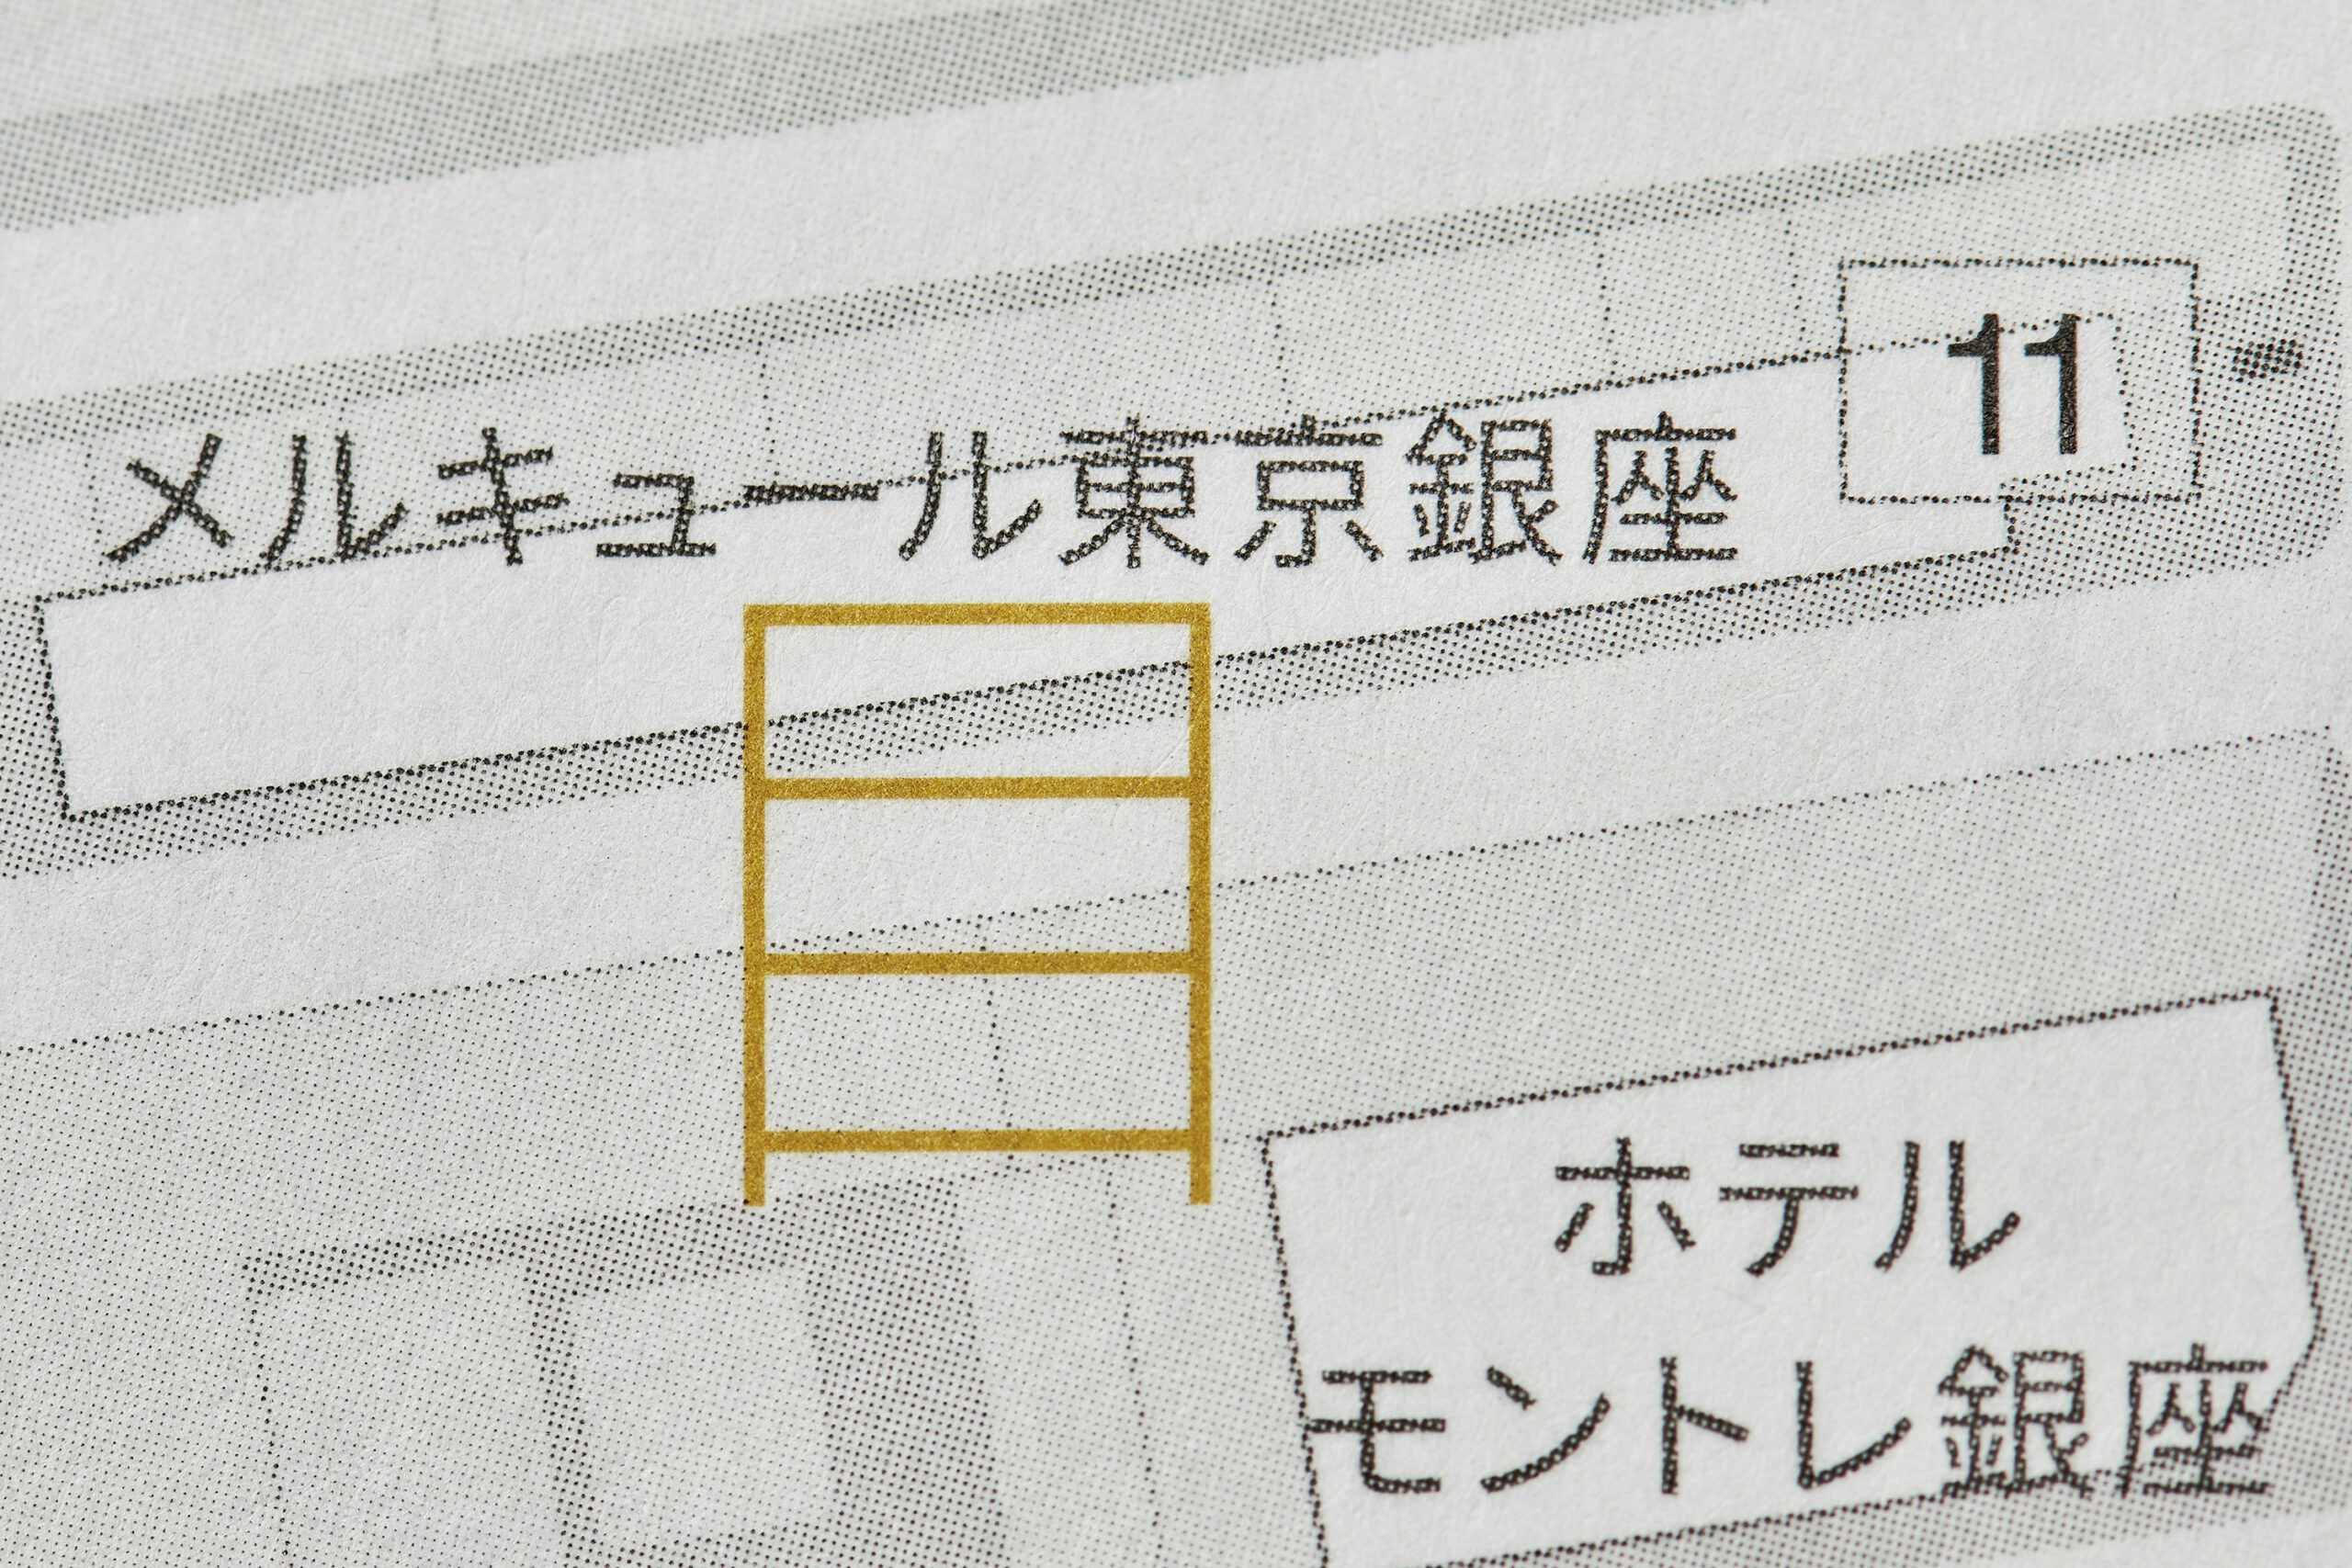 Ginza map detail